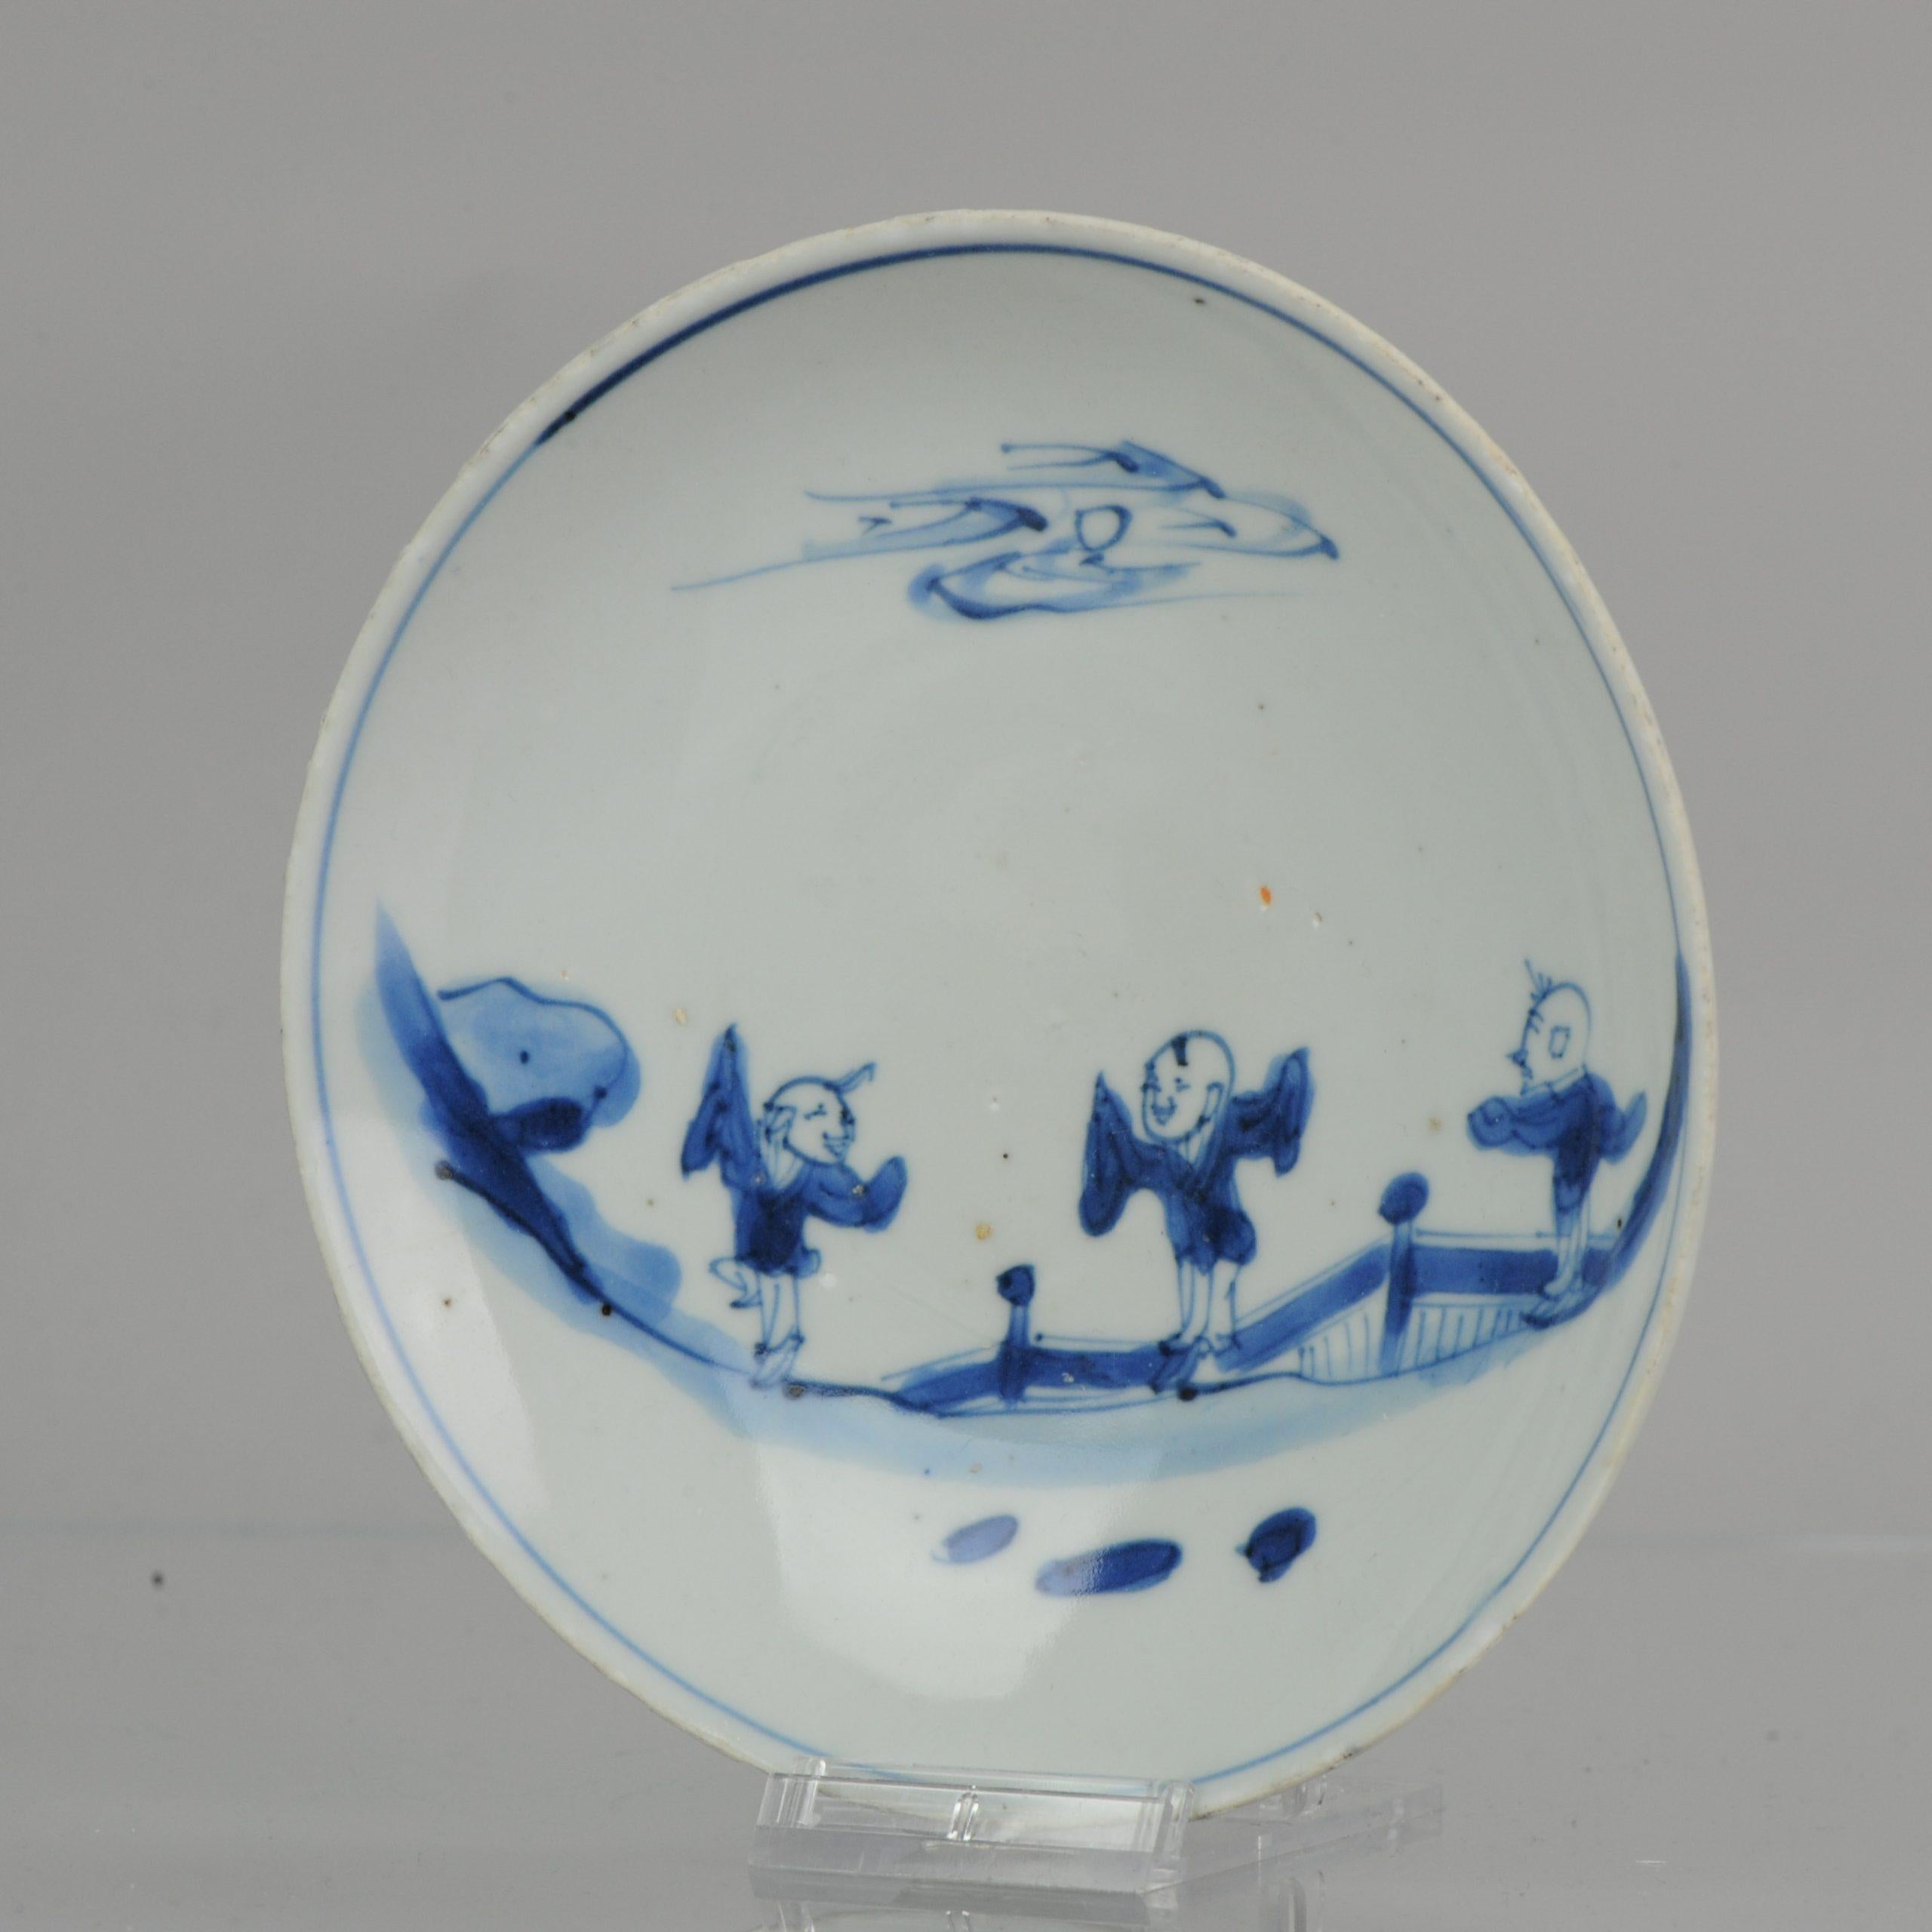 A very nicely decorated plate. Late Ming.

Condition:
2 line and rimfritting/mushikui. Size: 146 x 30mm
Period:
17th century transitional (1620-1661).